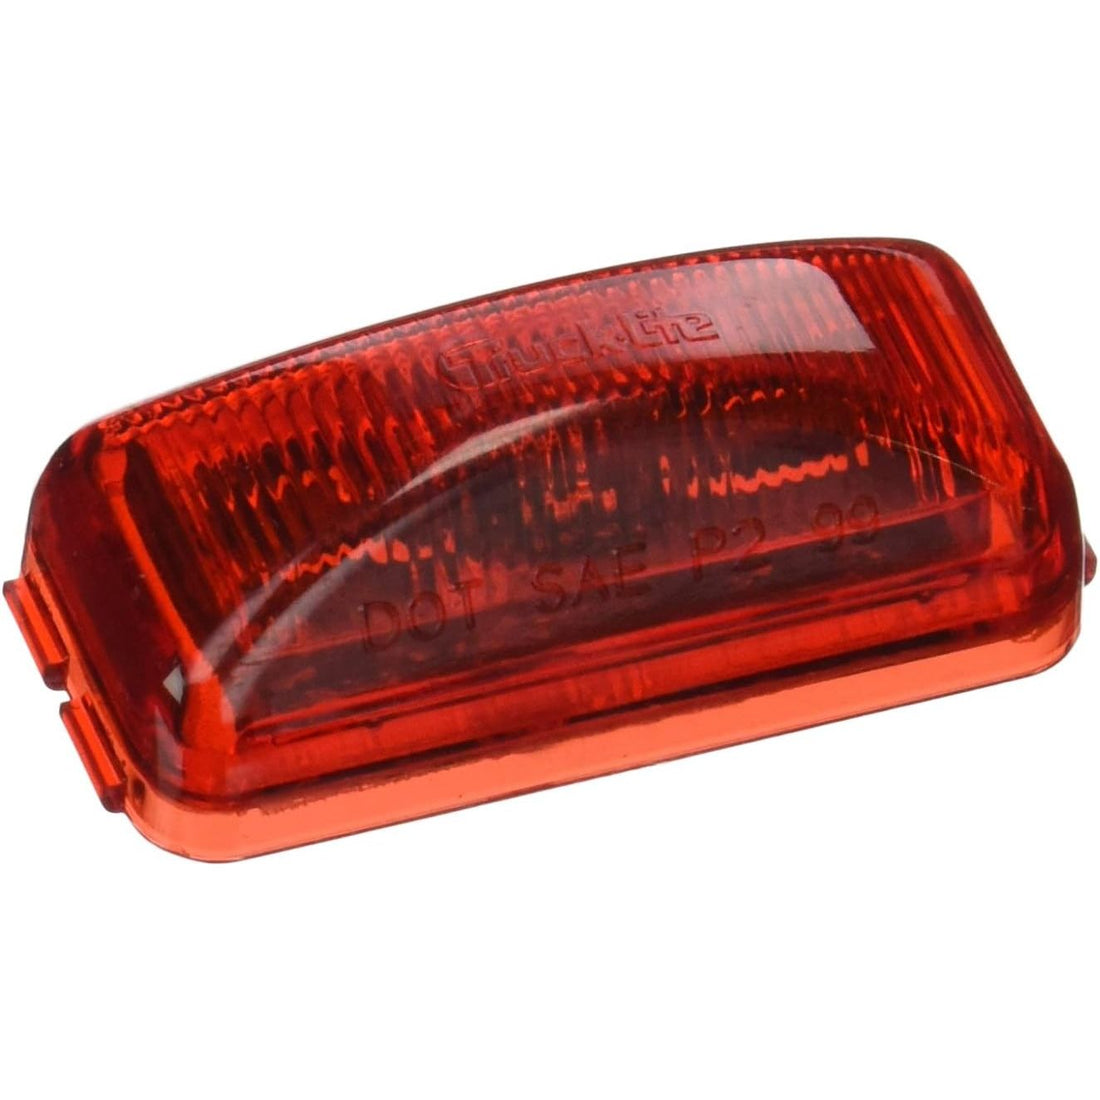 Truck-Lite (15250R) Marker/Clearance Lamp